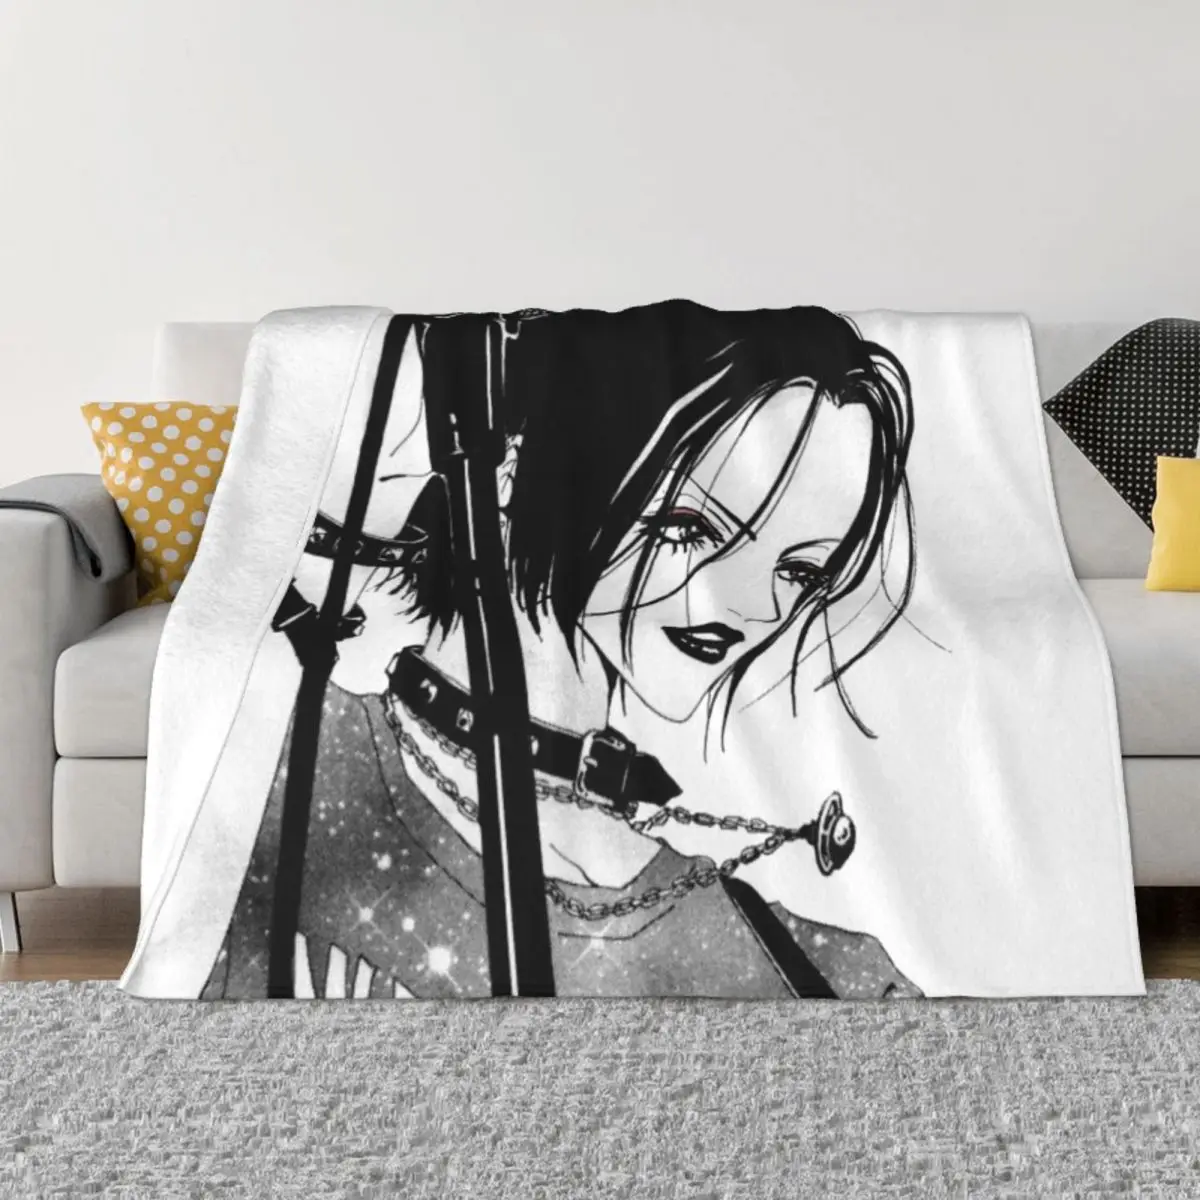 

Blankets Breathable Soft Flannel Autumn Harajuku Anime Manga Throw Blanket for Couch Outdoor Bed 3D Printed Nana Osaki